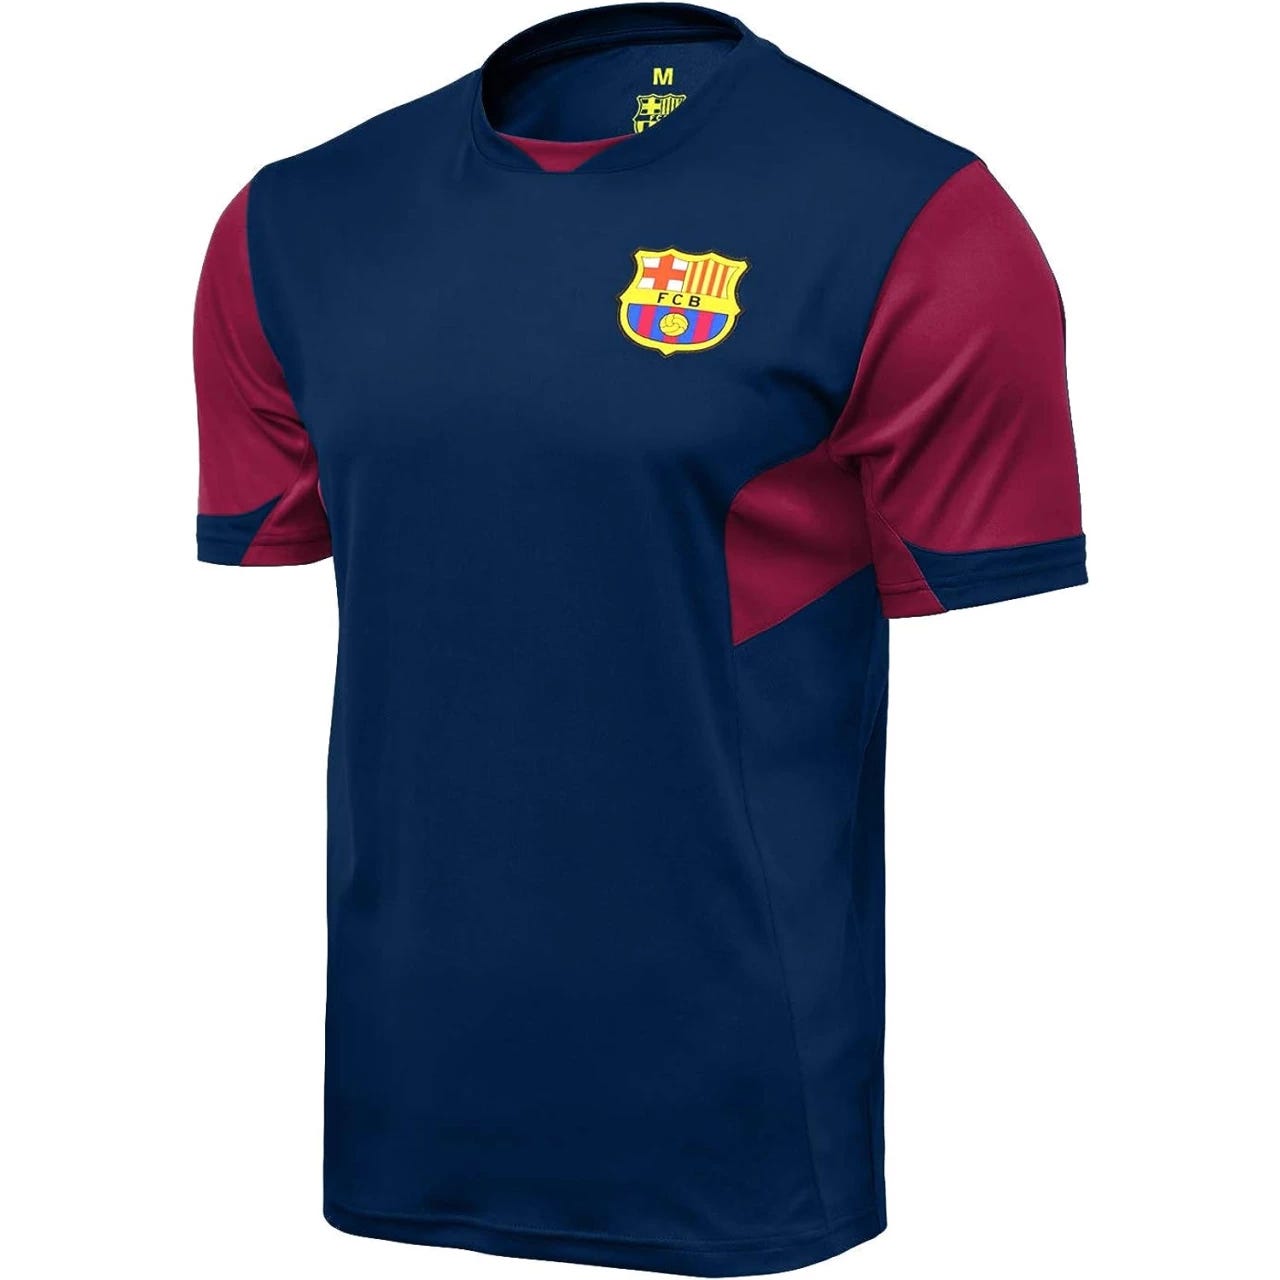 2023 FC Barcelona Jerseys: Complete Review for Ultimate Fans